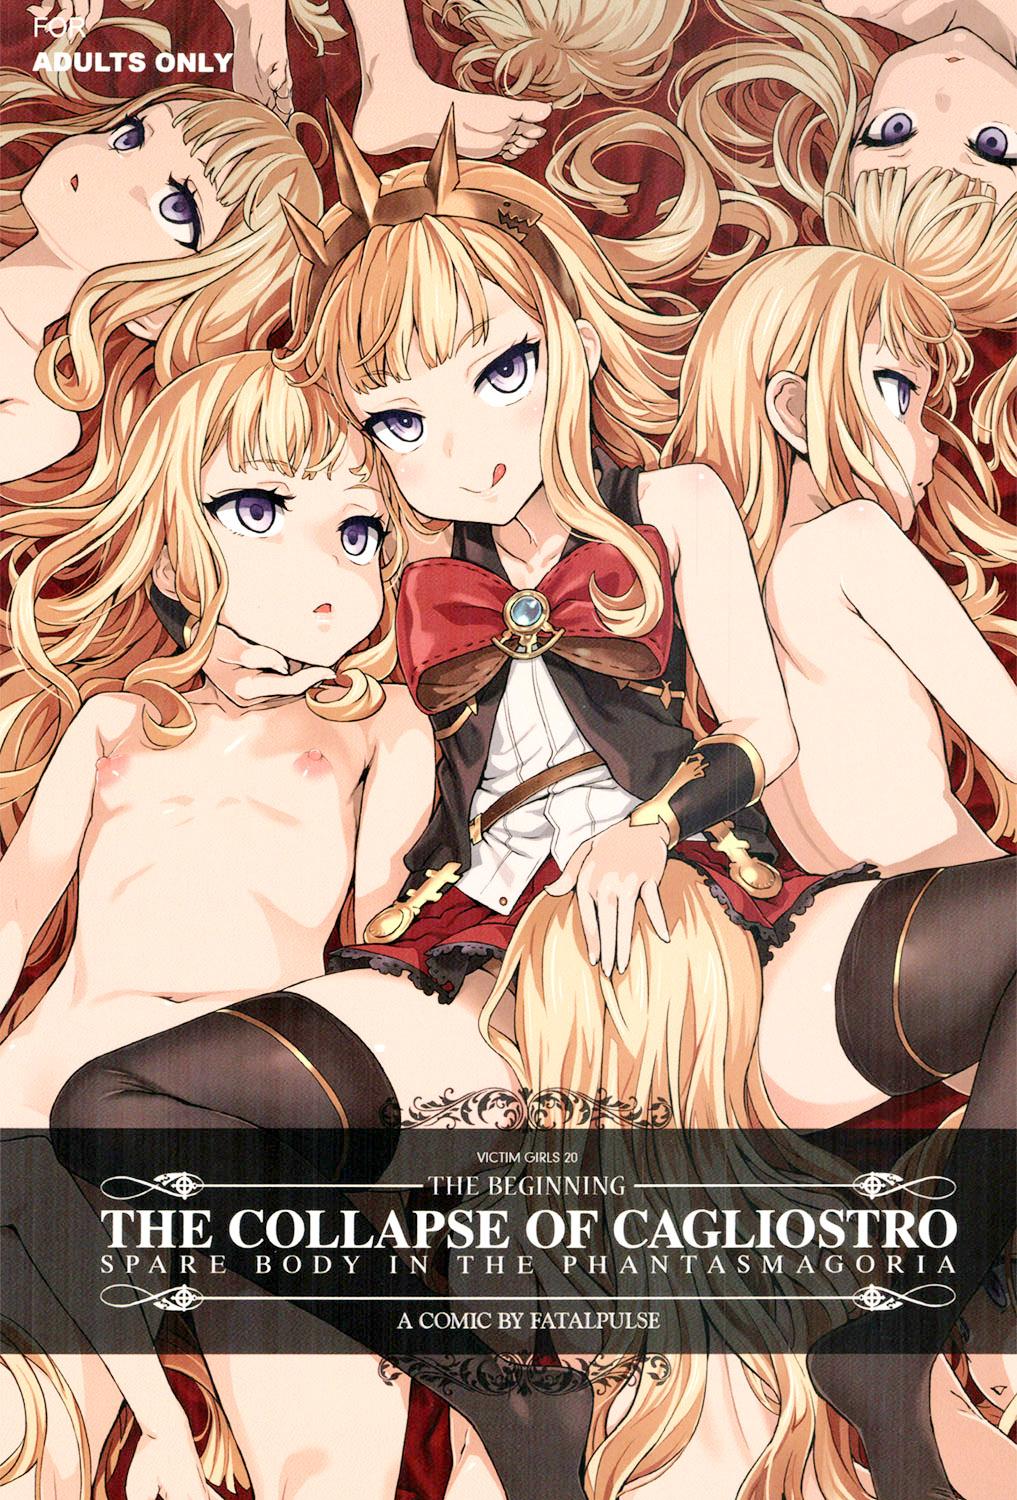 White Girl Victim Girls 20 THE COLLAPSE OF CAGLIOSTRO - Granblue fantasy Amateurs Gone Wild - Page 2